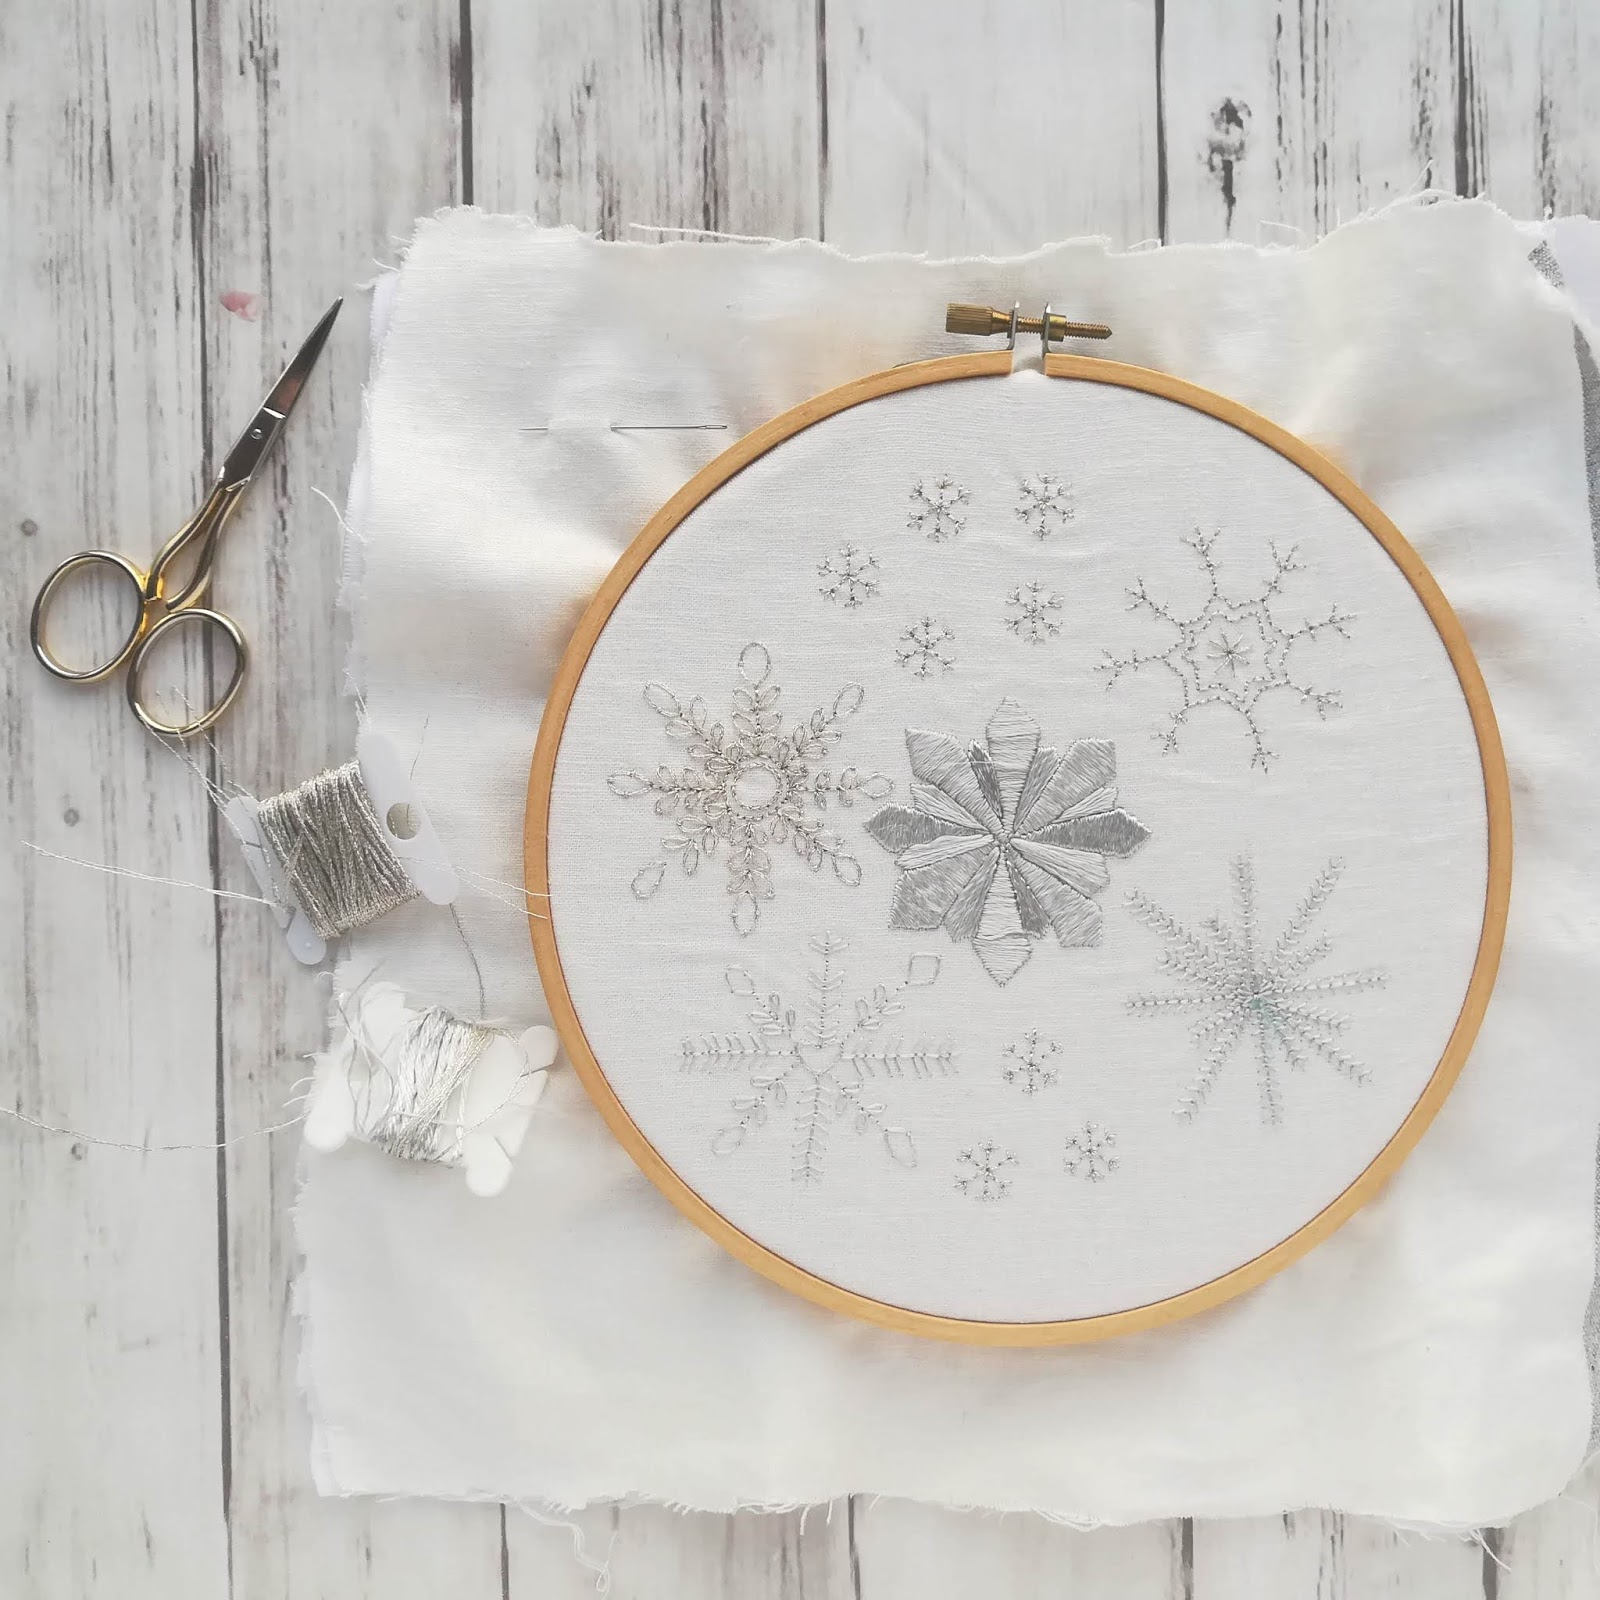 Hand Stitch Embroidery Patterns Free A Lively Hope Snowflakes Hand Embroidery Pattern Free